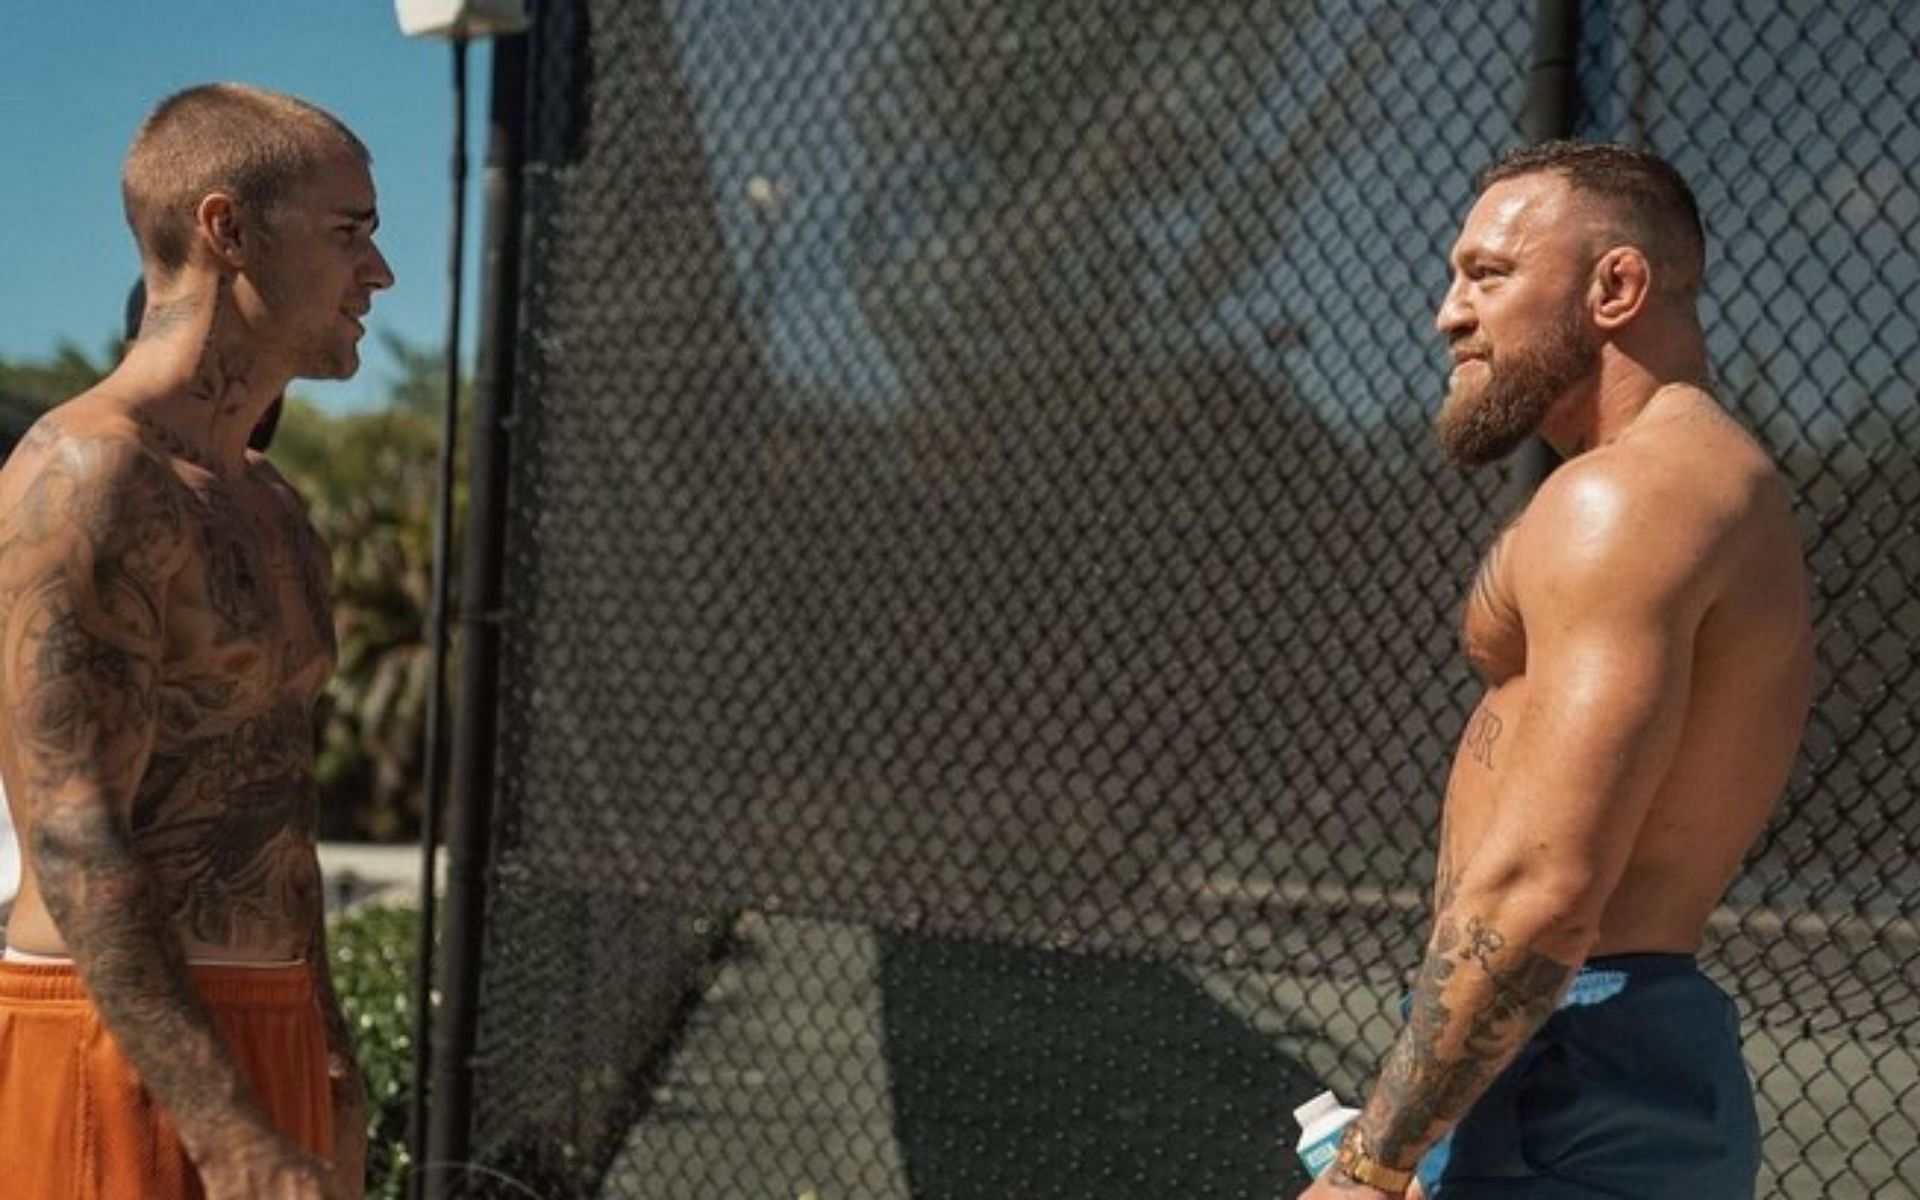 Conor McGregor excited to catchup with Justin Bieber in Las Vegas